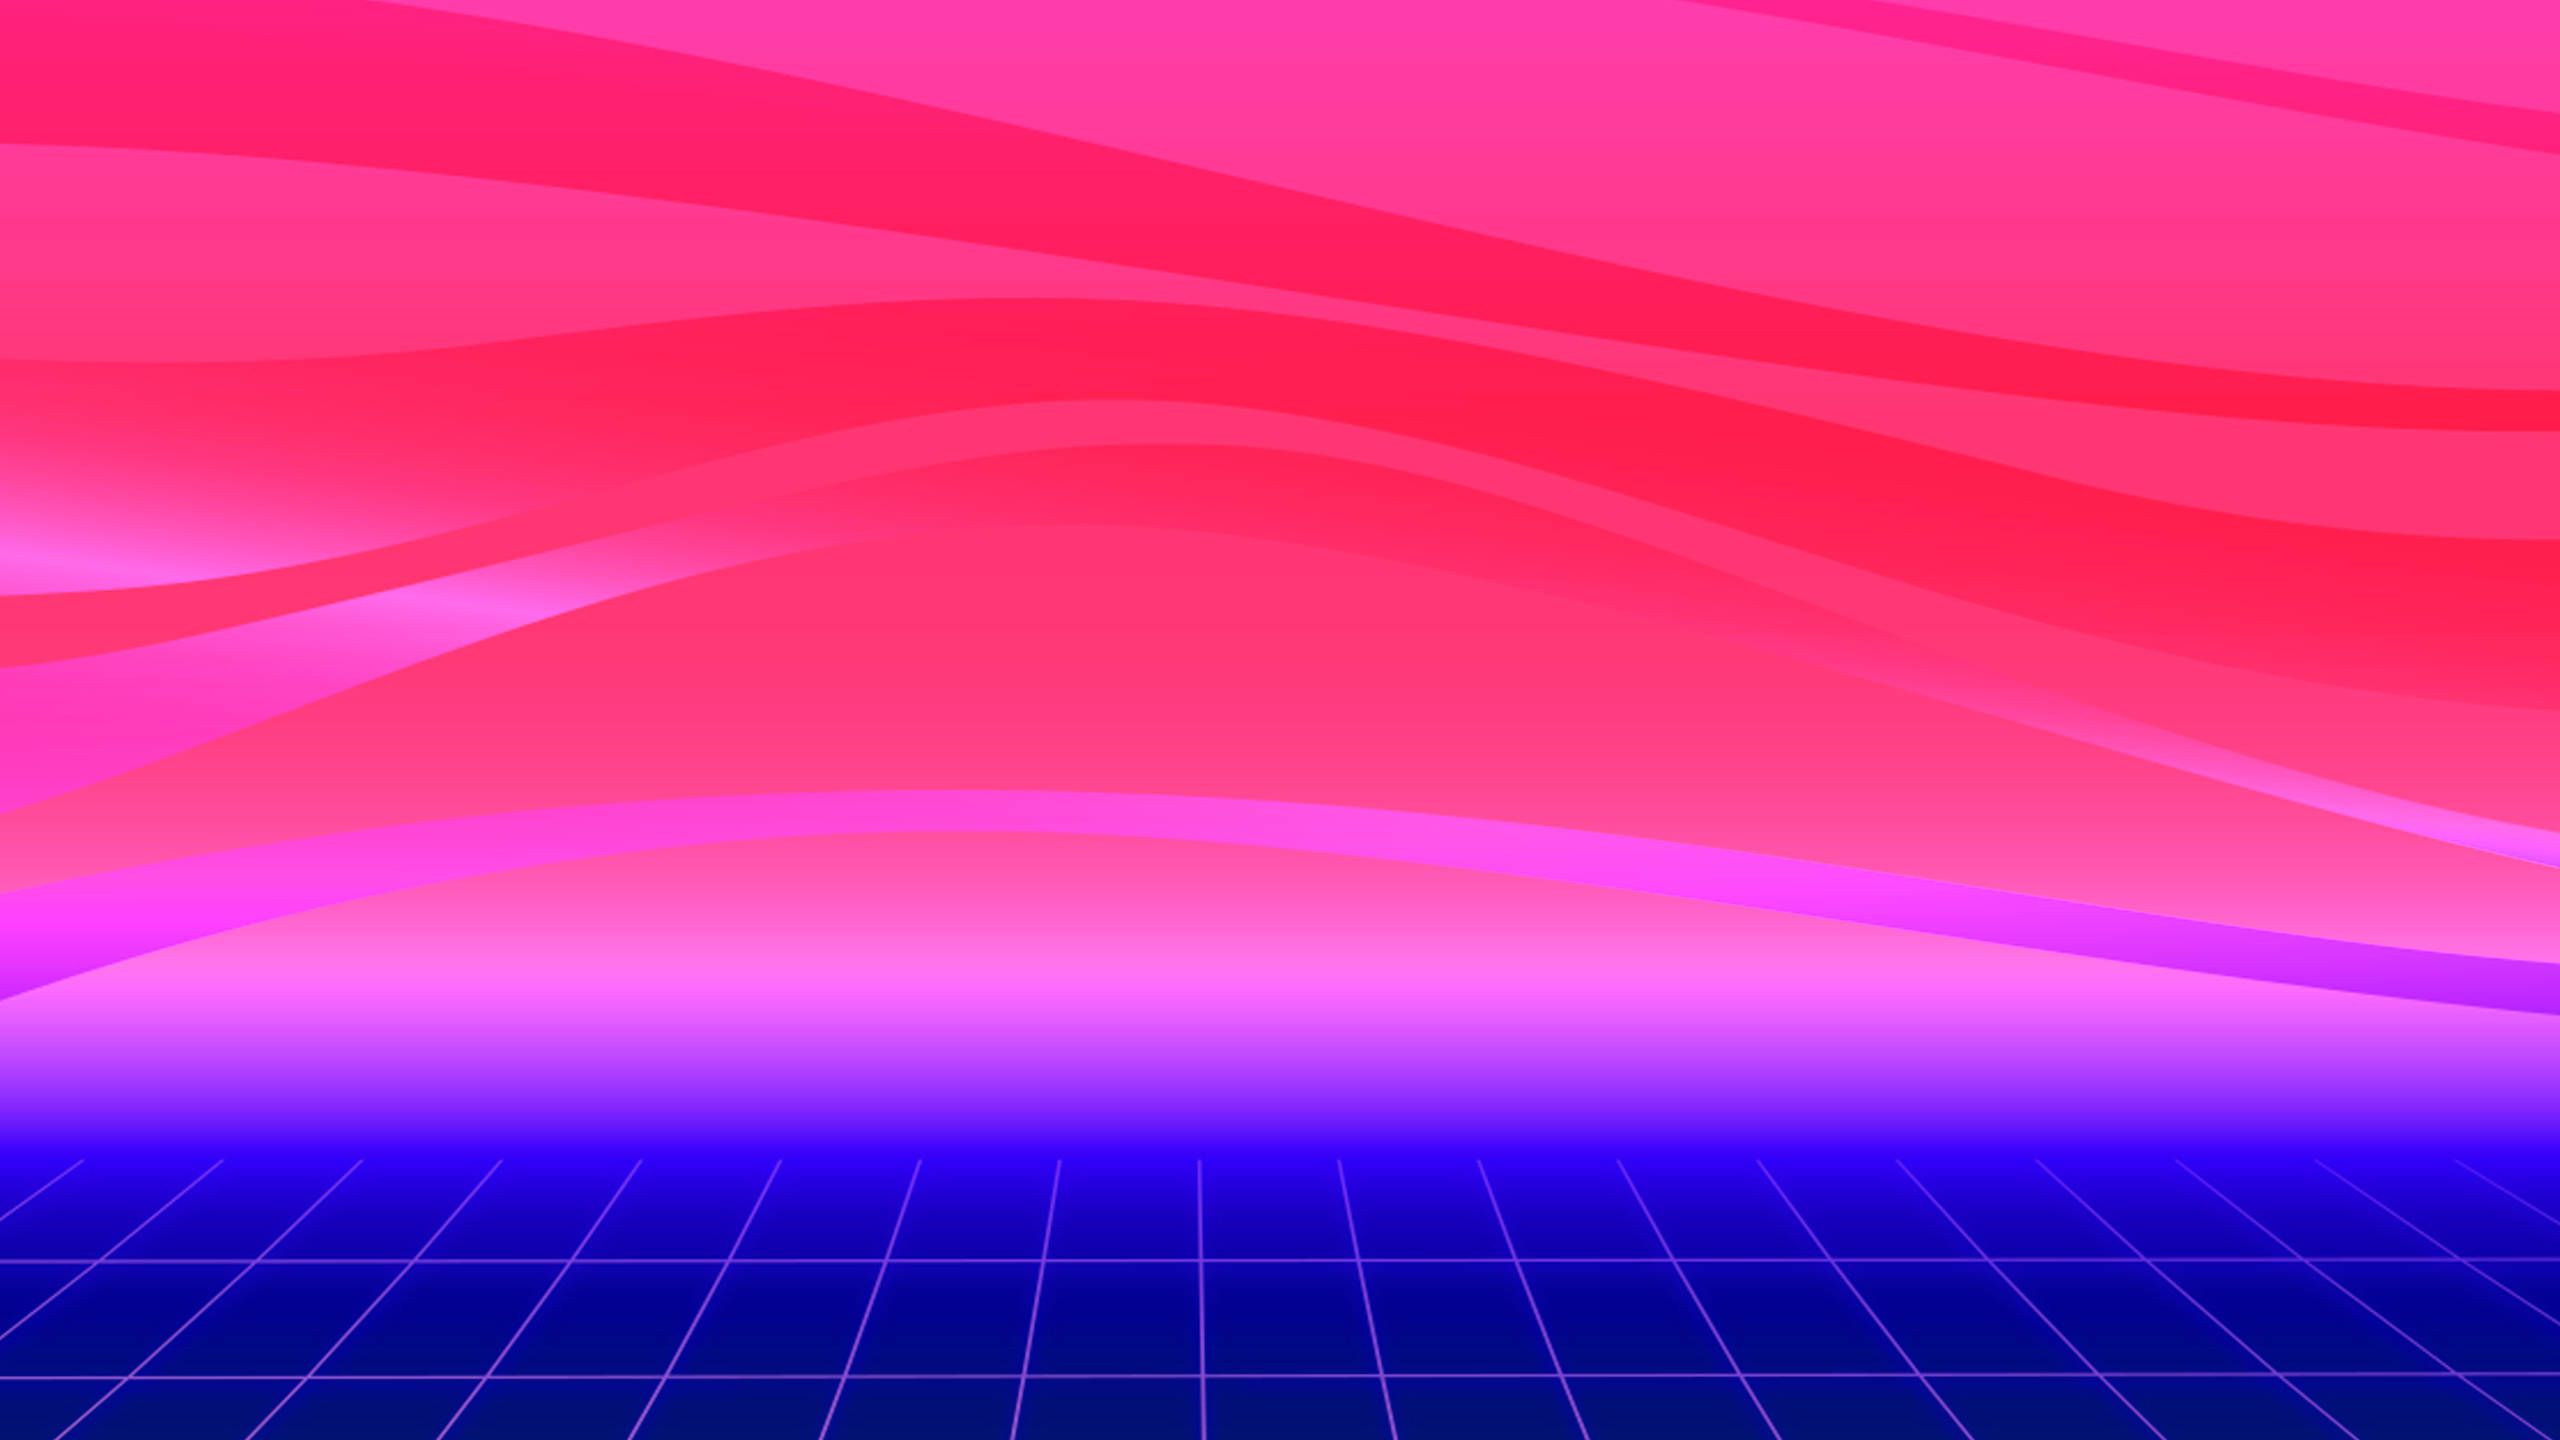 Pink And Blue 80s Retro Vintage Abstract Wallpaper